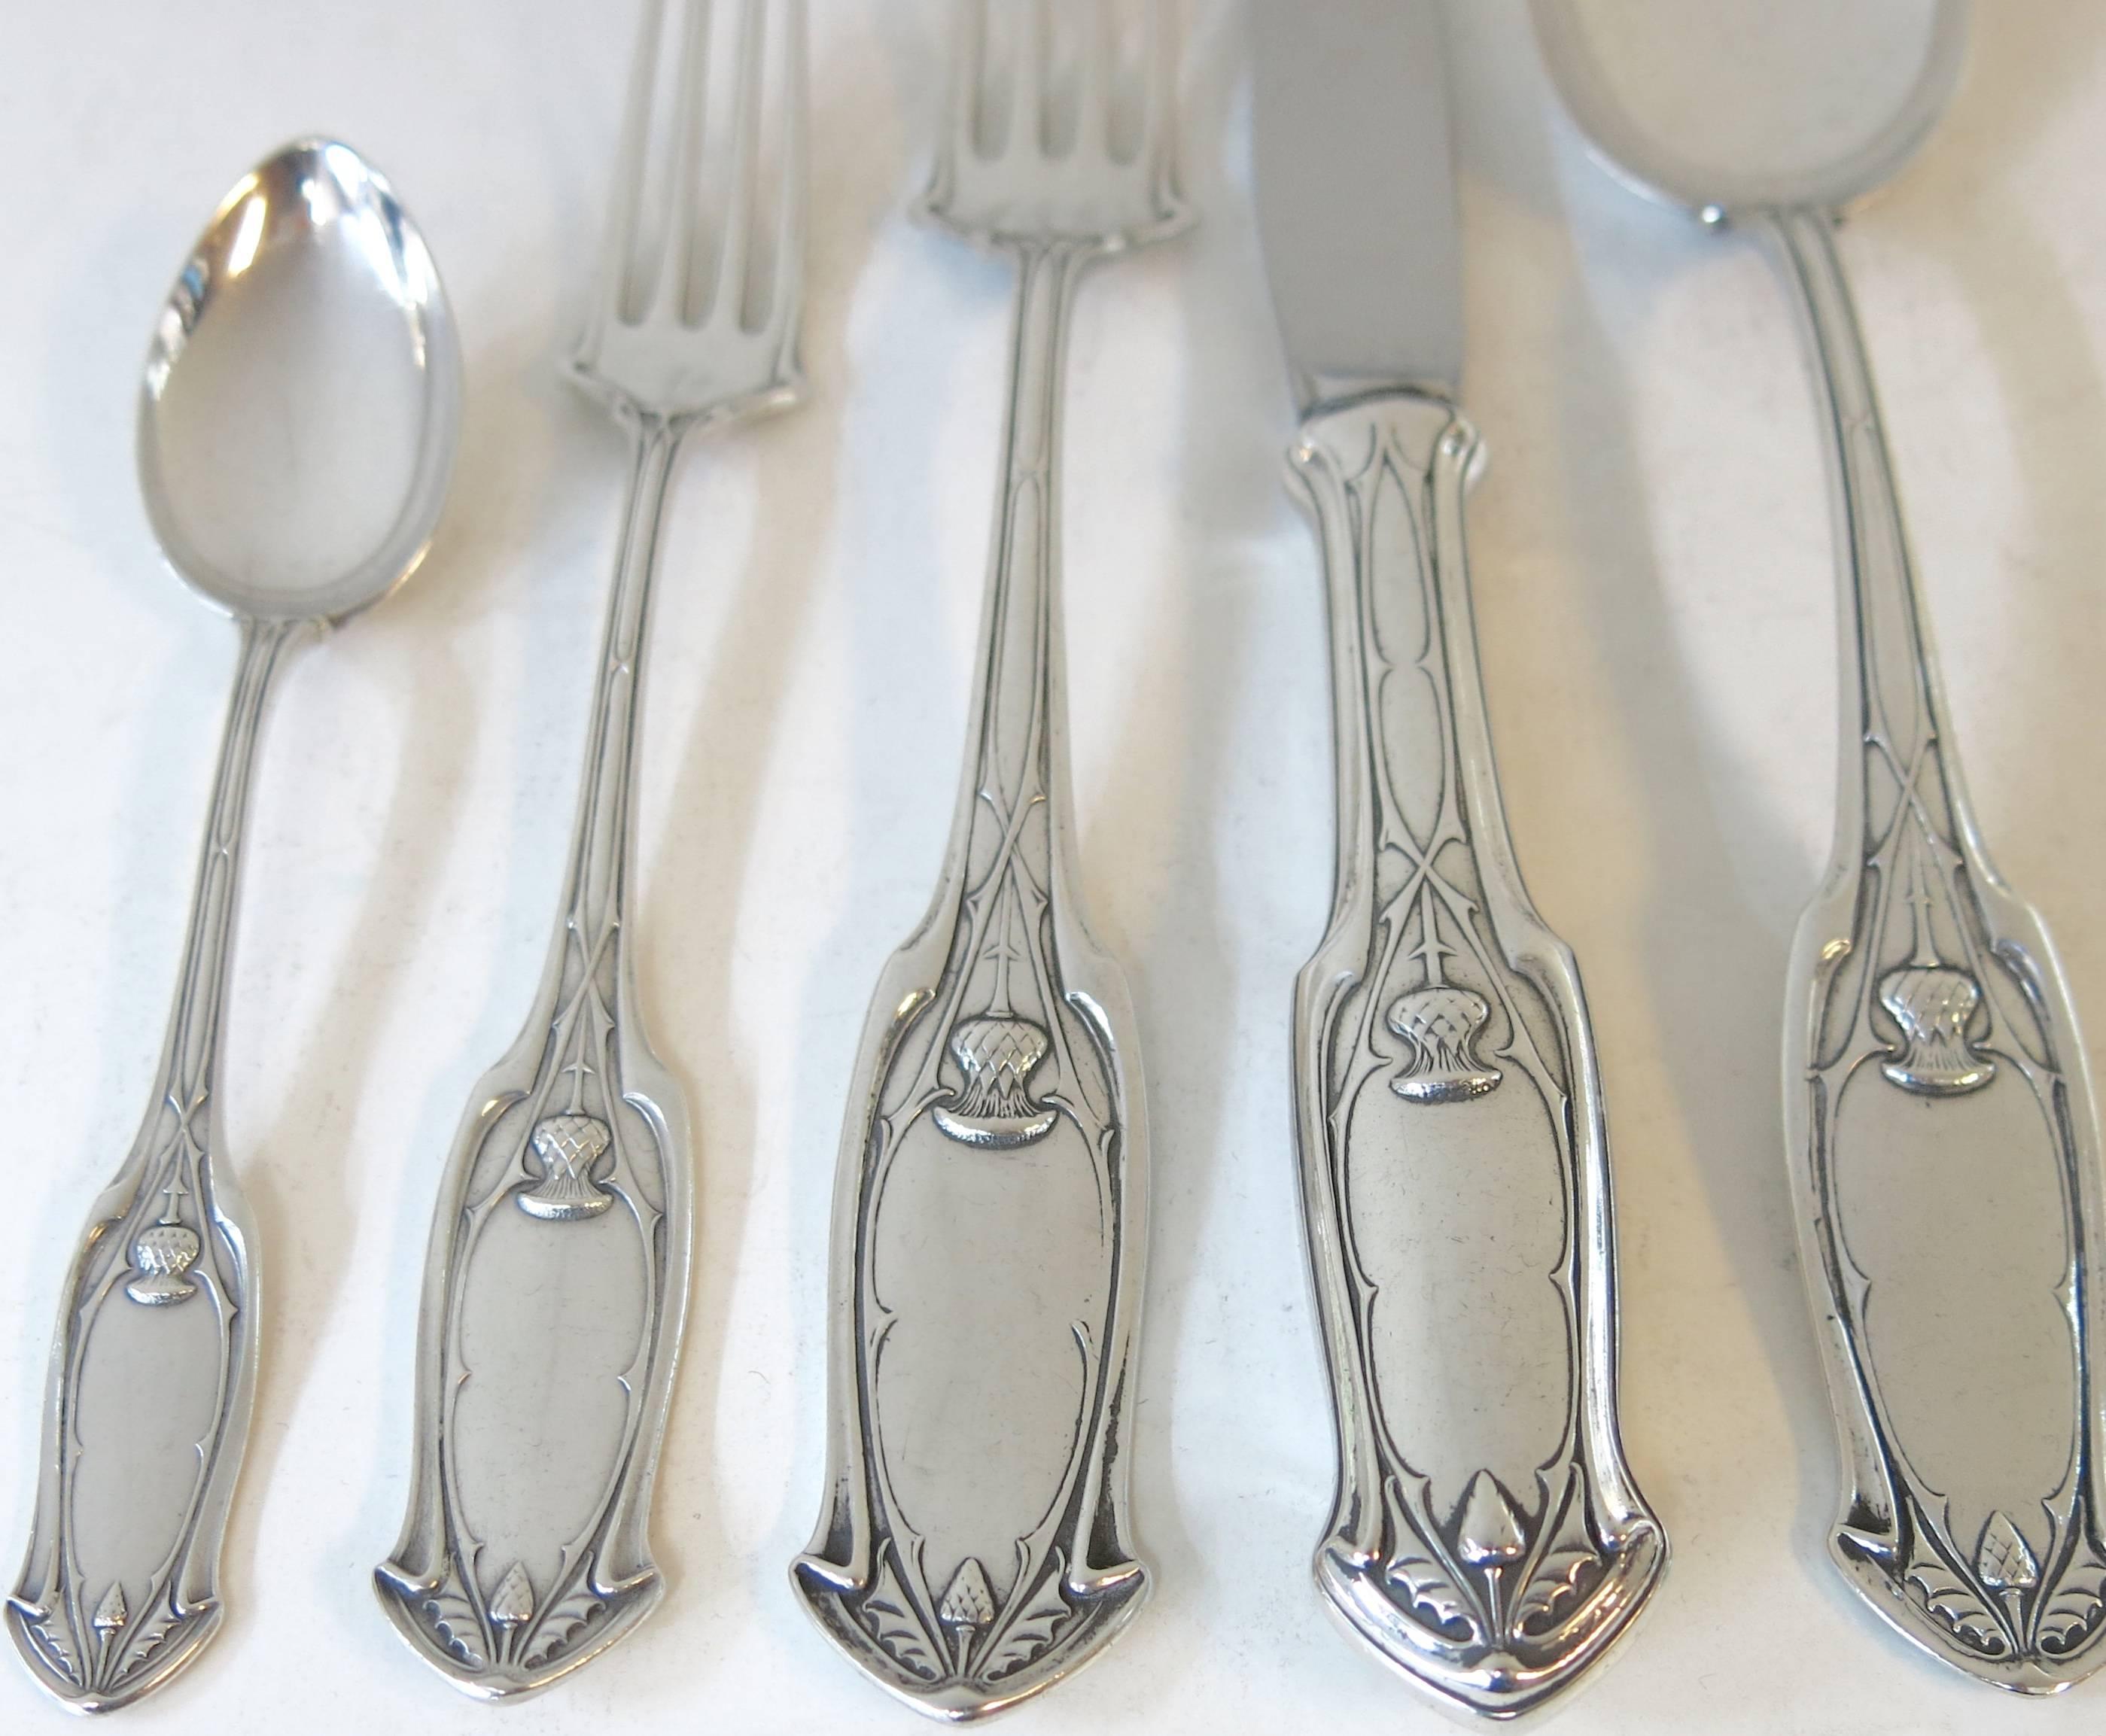 Antique German, 800 silver, flatware set for 12 people. An unusual, custom-made, hand-forged pattern with thistle decoration. Each piece is beautifully hand engraved on one side with the original monogram. Made by S & D Lowenthal. Total of 60